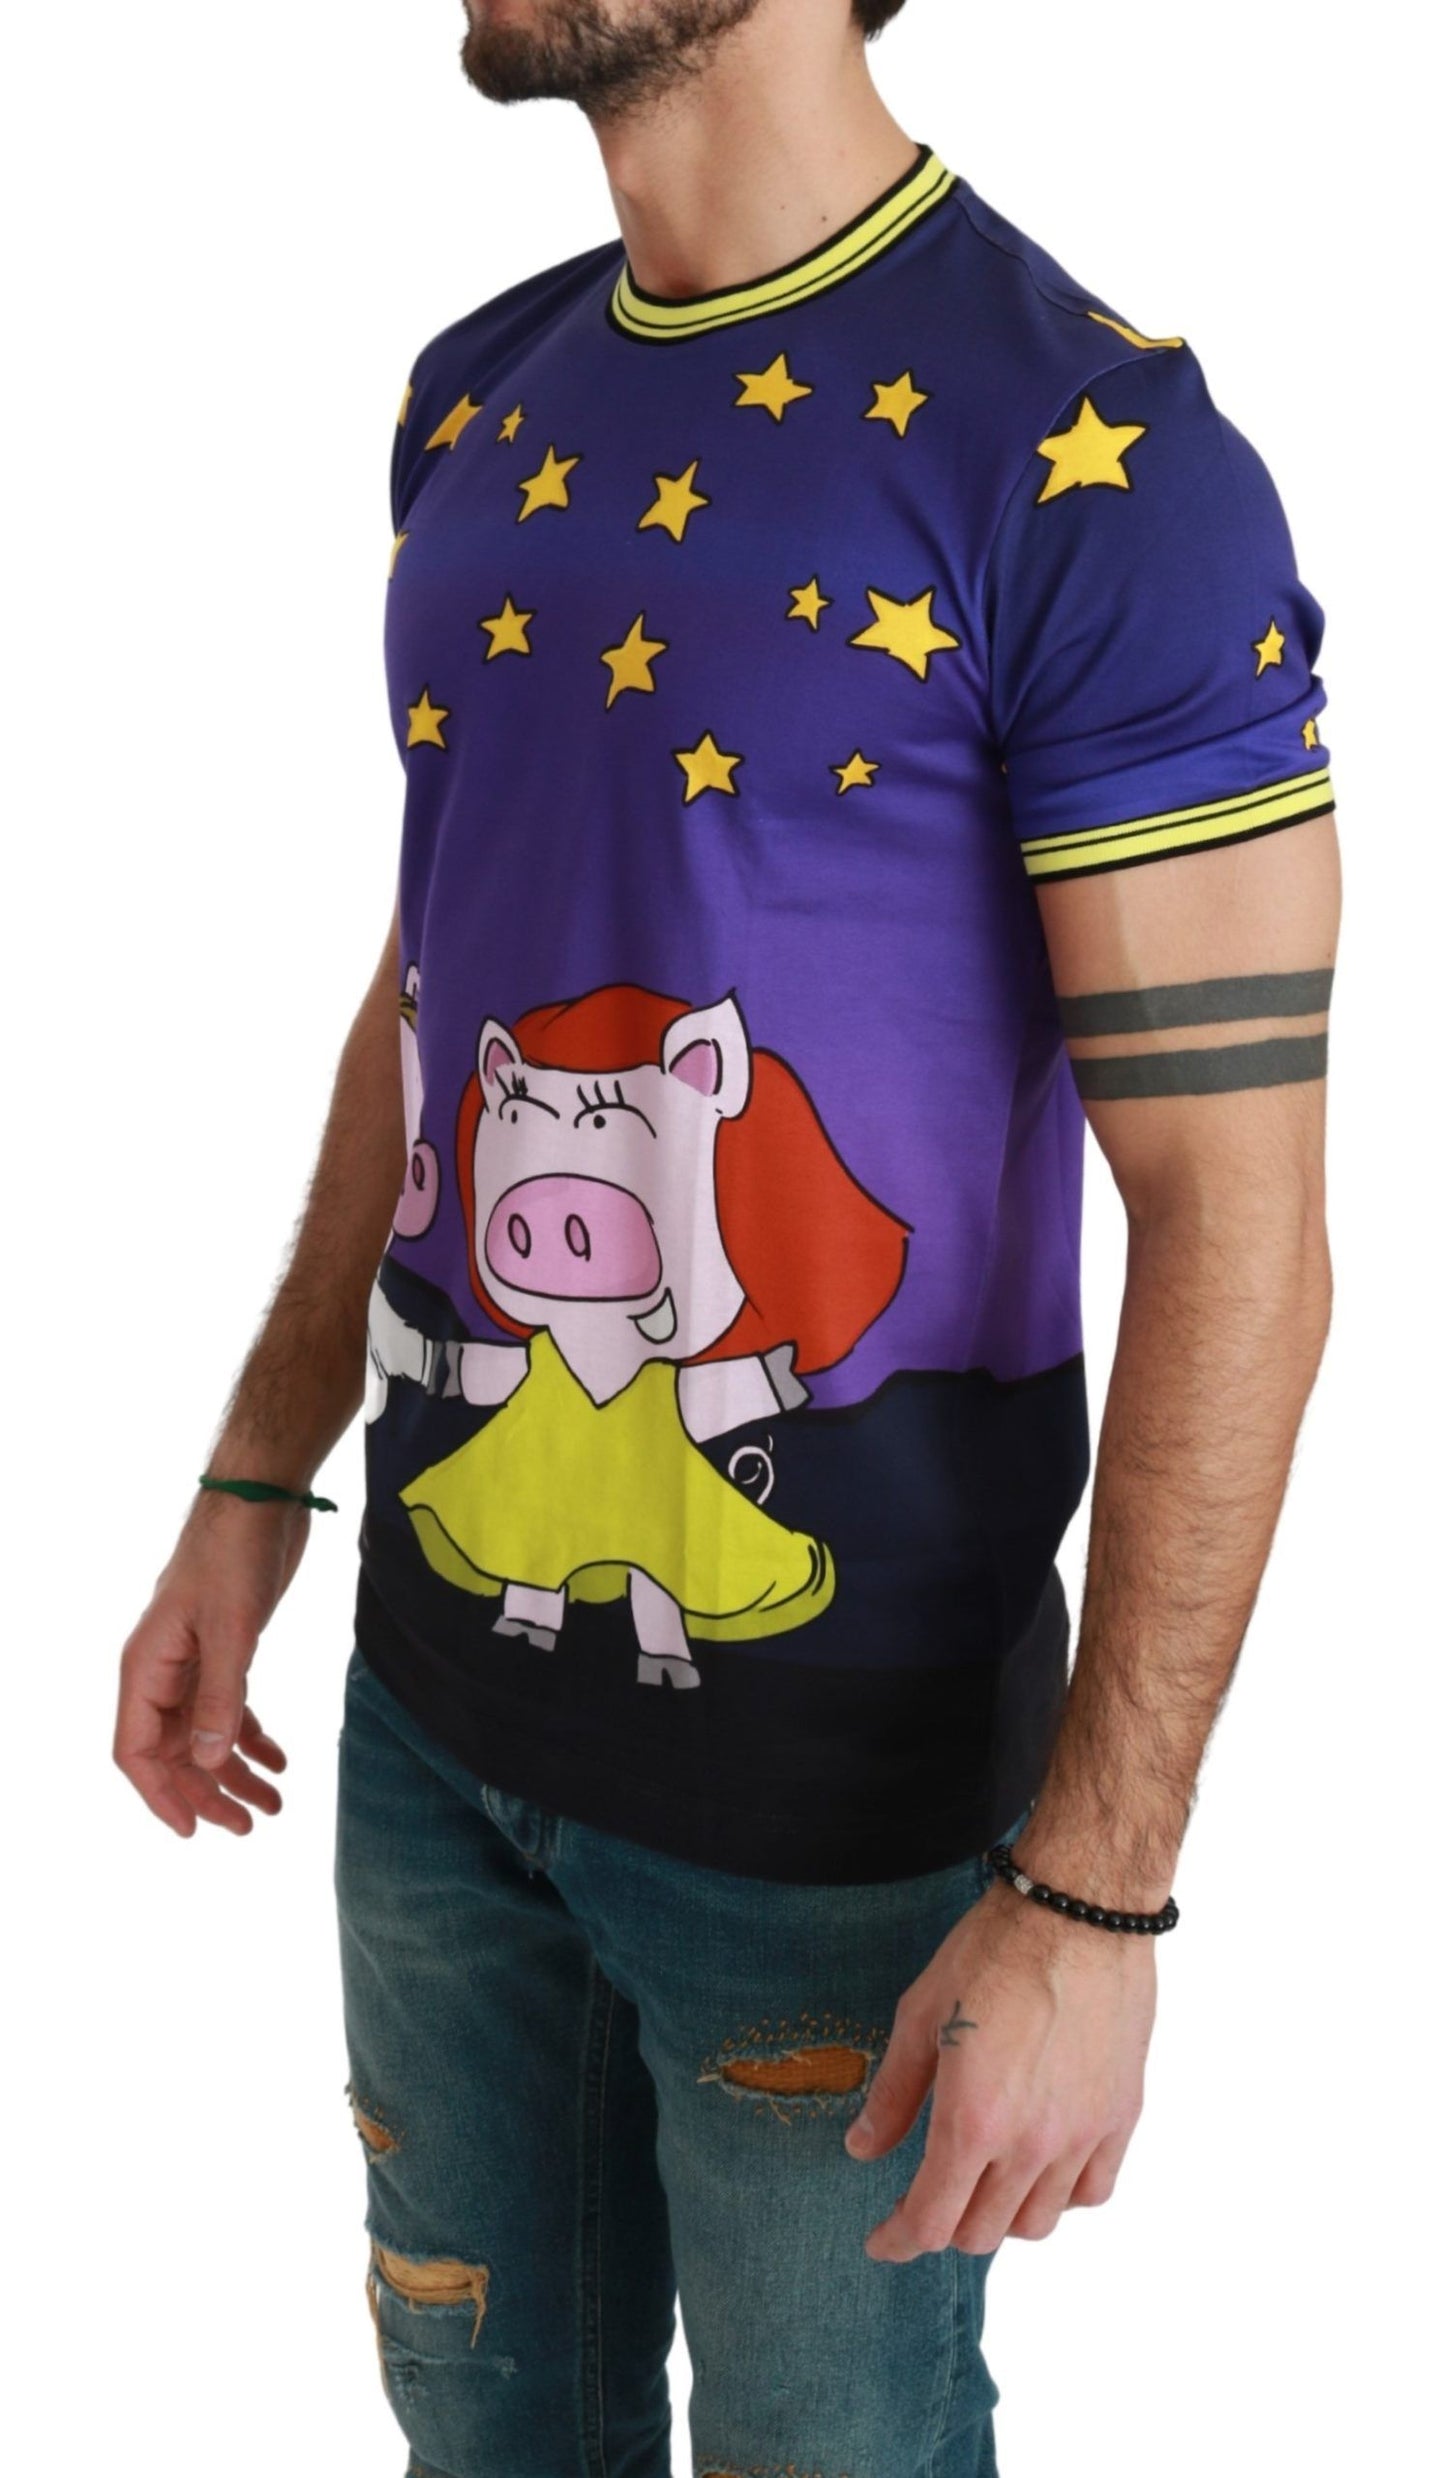 Dolce & Gabbana Purple  Cotton Top 2019 Year of the Pig  T-shirt